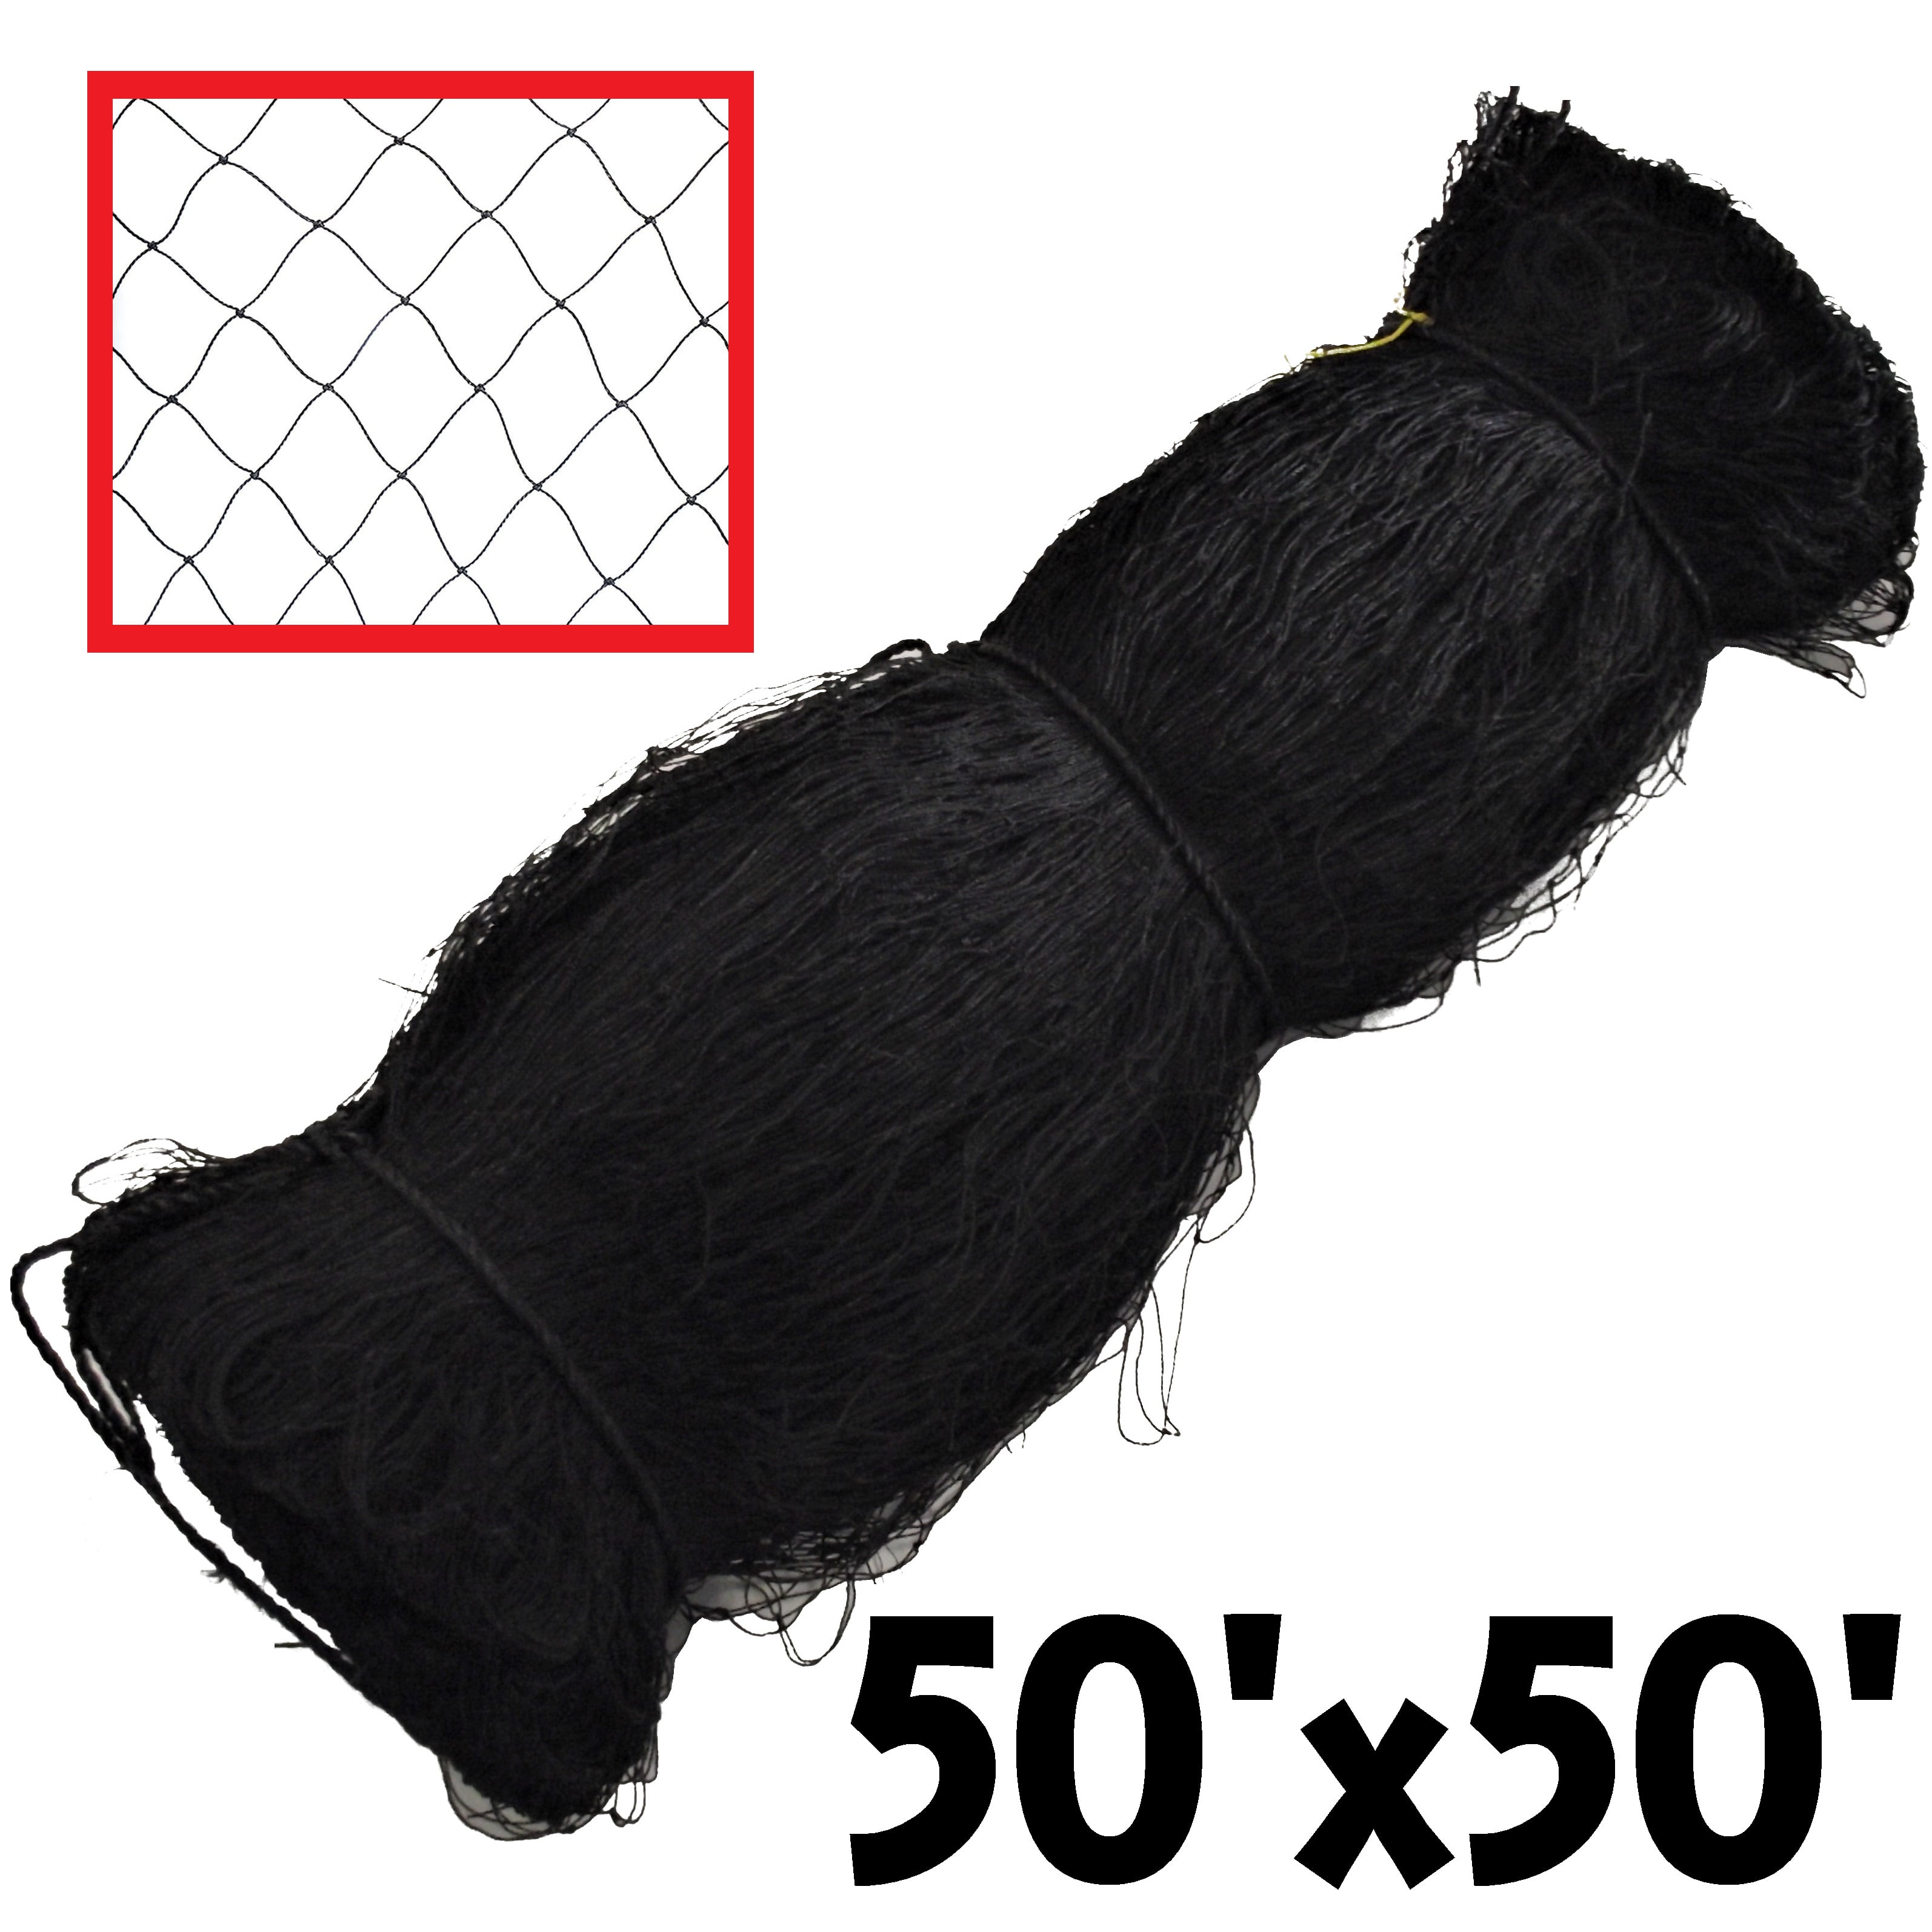 Details about   RITE FARM PRODUCTS 25x25 POULTRY BIRD AVIARY NETTING GAME PEN NET GARDEN CHICKEN 